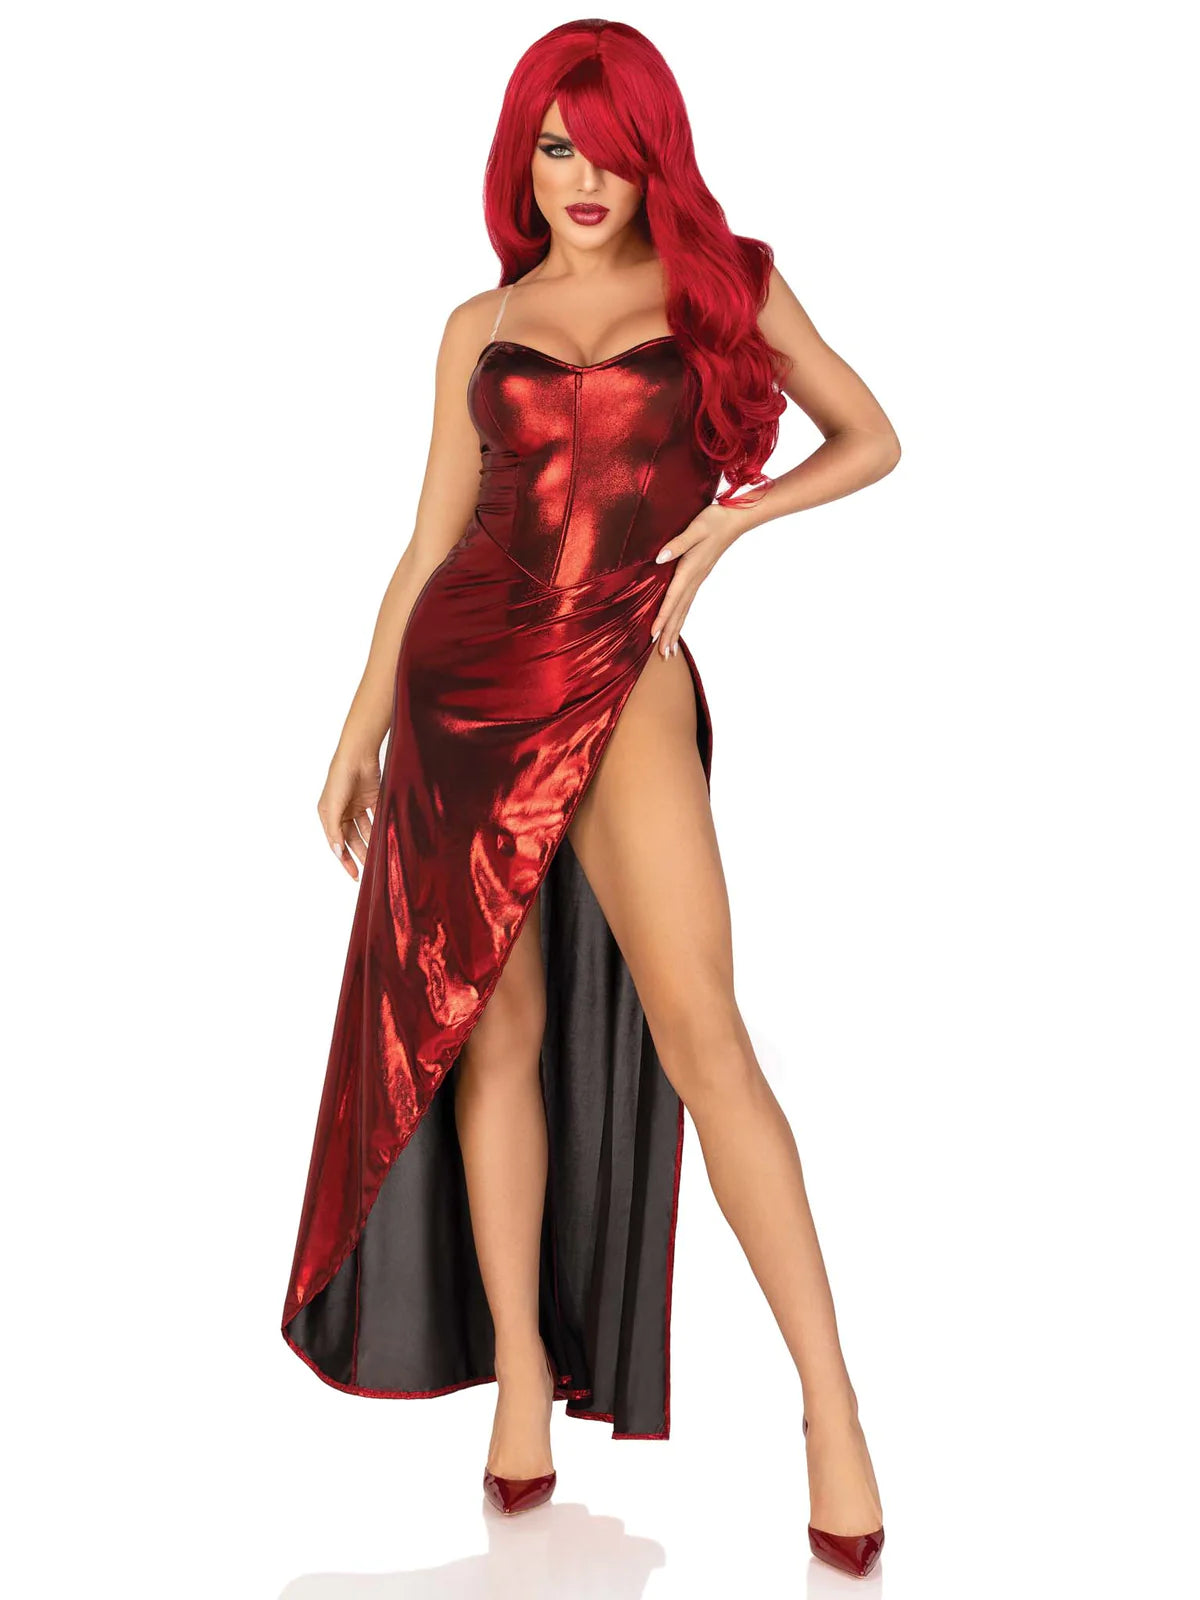 Model wearing red lamé strapless dress with high cut hip-level slit on left side. Dress has princess seaming and a sweetheart neckline with single corset boning detail at middle of bodice. Shown from front